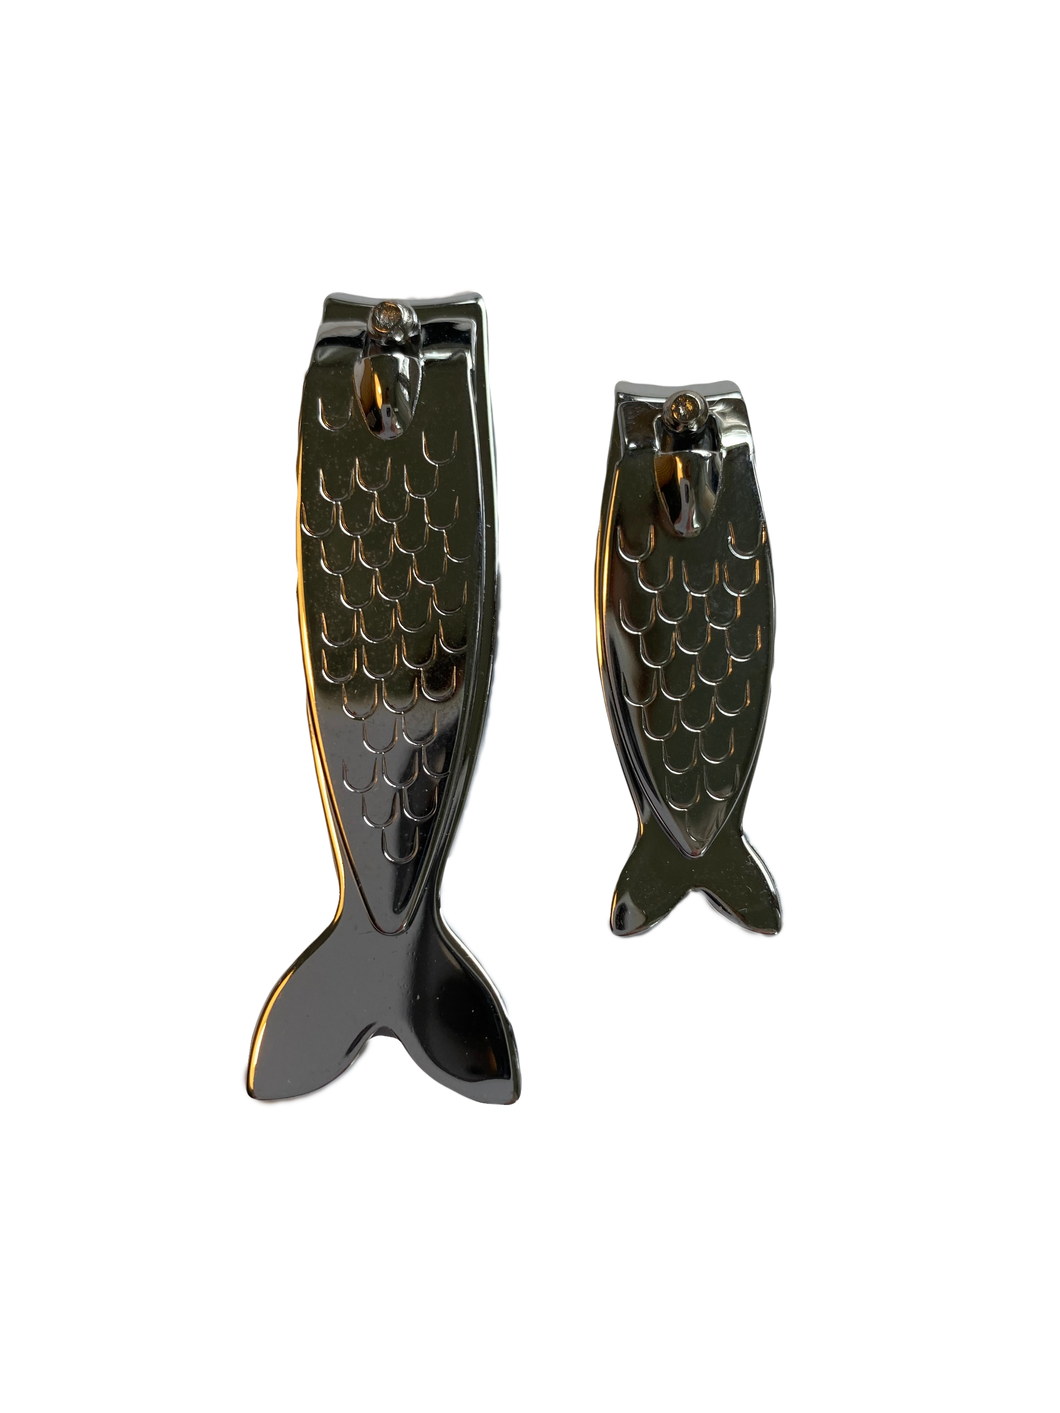 Big Fish, Little Fish Nail Clippers